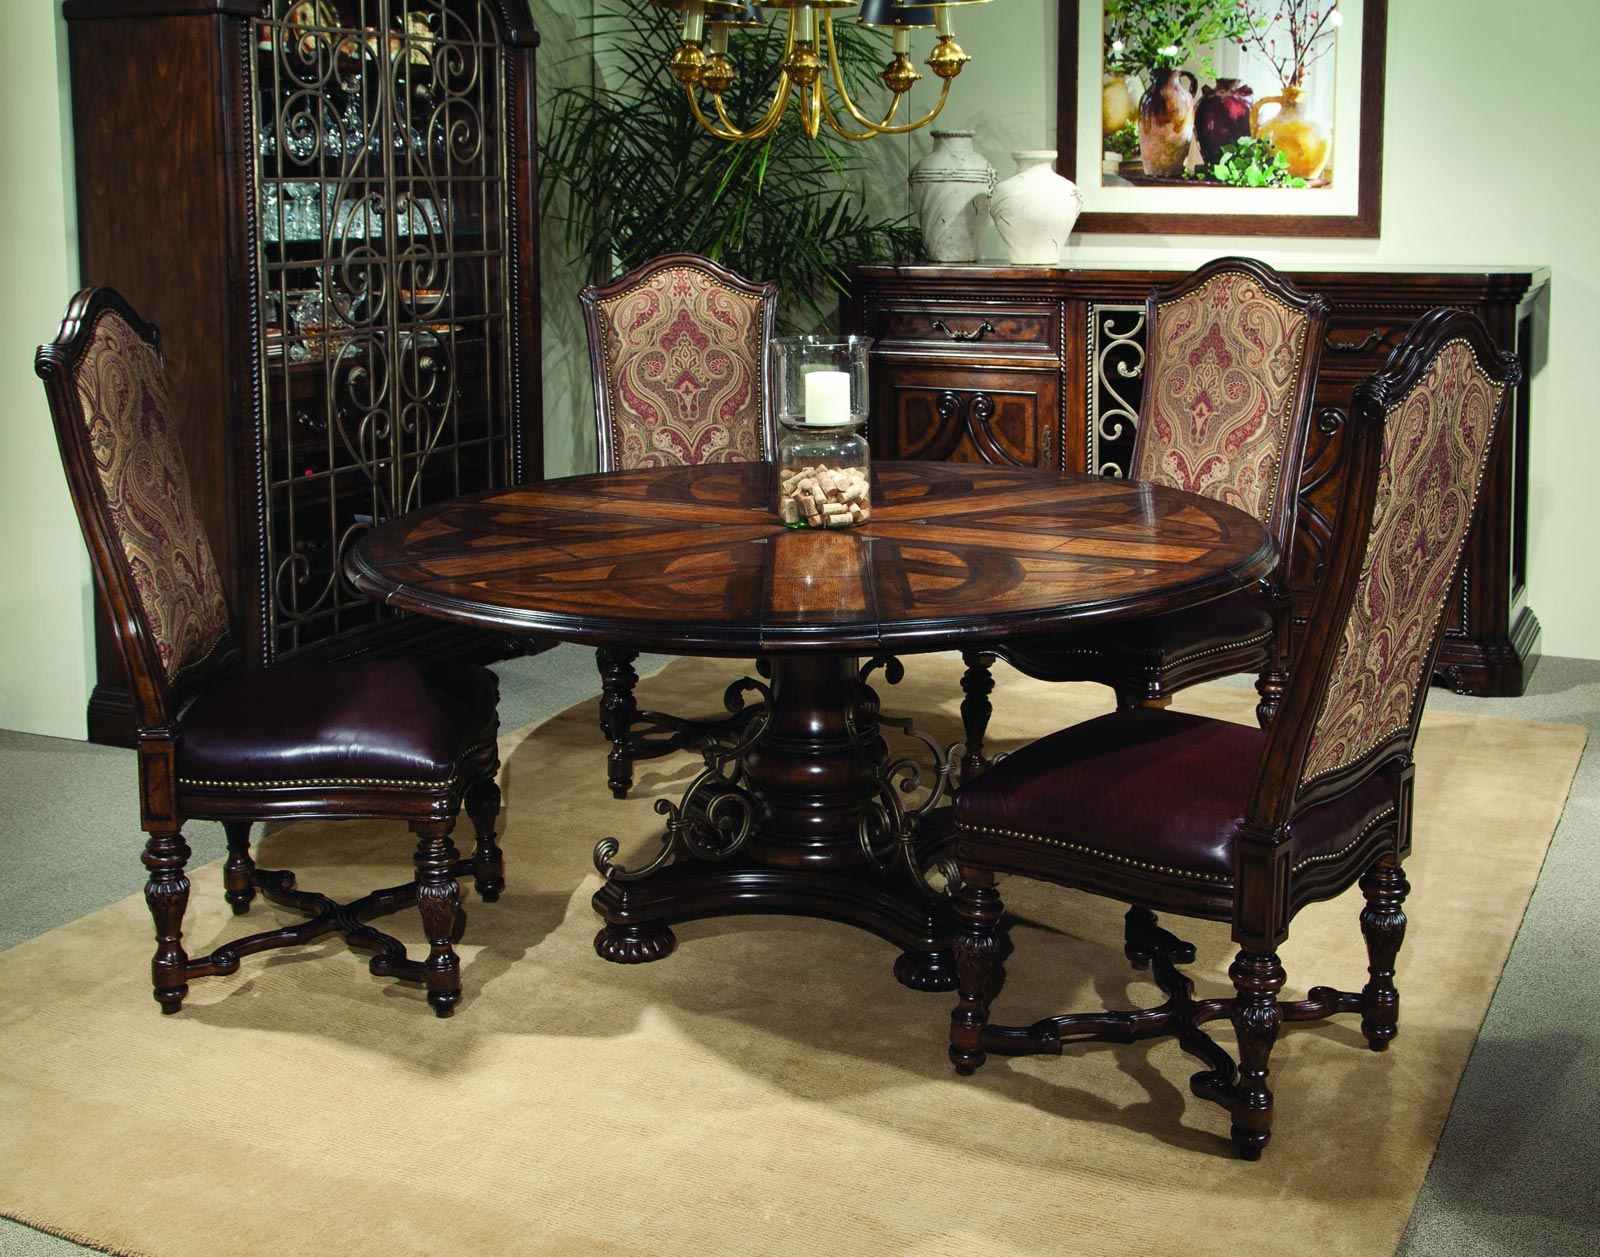 Wooden Furnitures Applying Mesmerizing Wooden Furniture Dining Room Applying Formal Dining Room Sets With Pedestal Round Table Furnished With Chairs And Completed With Chandelier In Golden Color Dining Room Formal Dining Room Sets For Contemporary Interiors